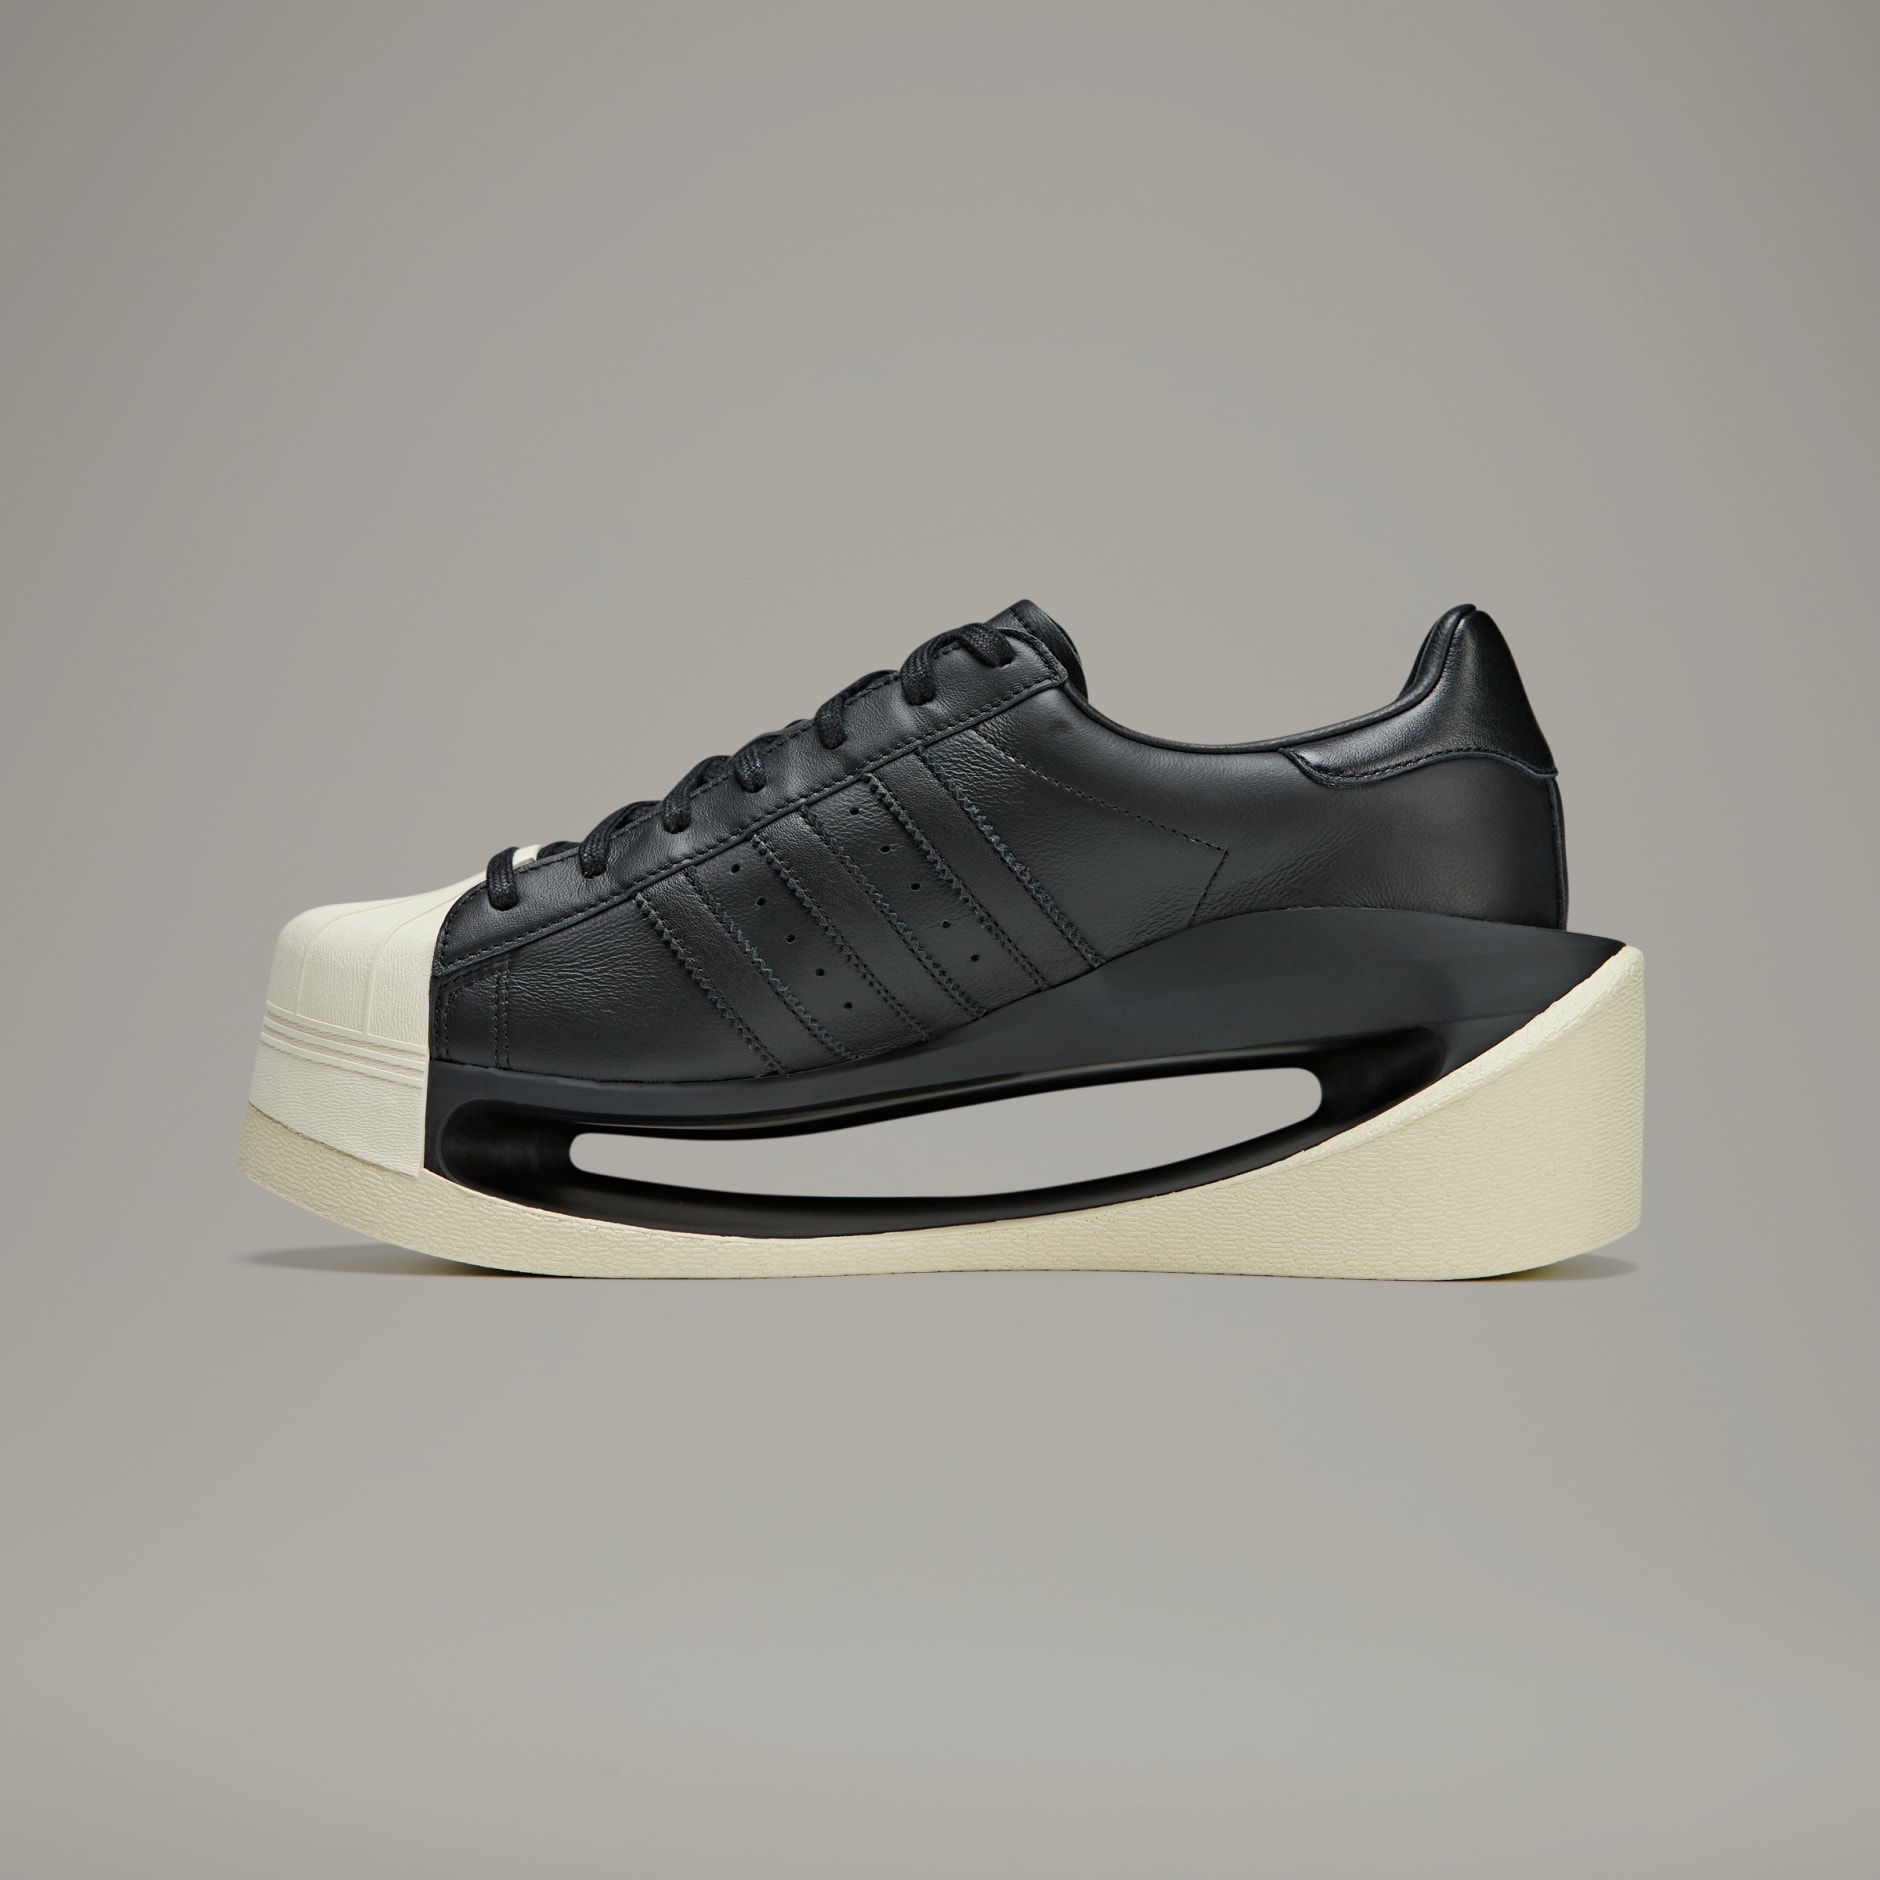 All products - Y-3 Gendo Superstar Shoes - Black | adidas South Africa